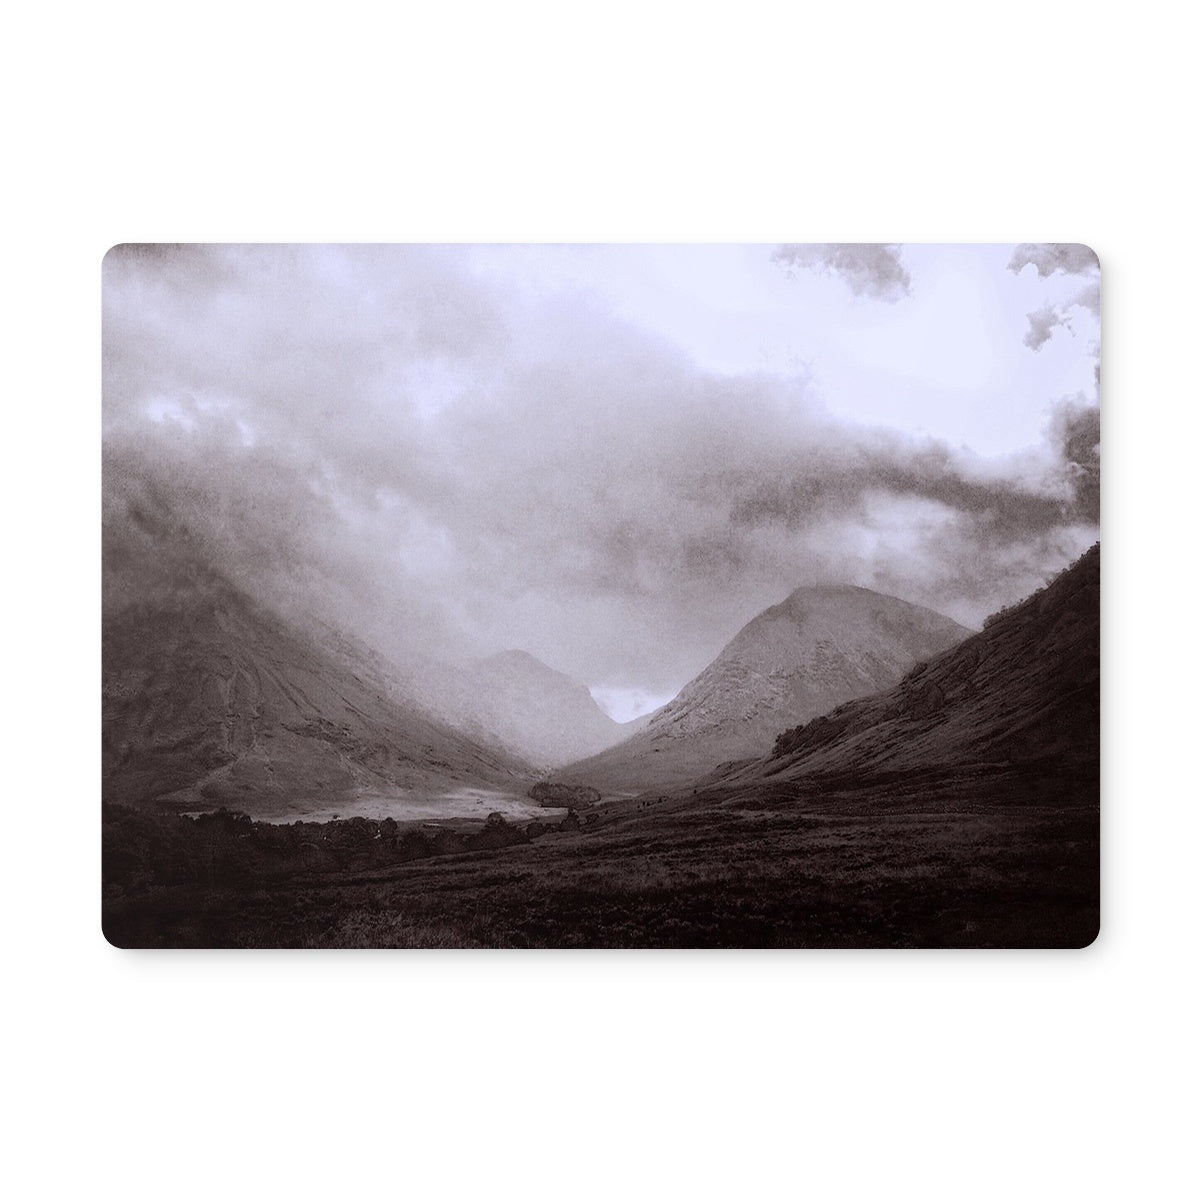 Glencoe Mist Art Gifts Placemat-Placemats-Glencoe Art Gallery-4 Placemats-Paintings, Prints, Homeware, Art Gifts From Scotland By Scottish Artist Kevin Hunter